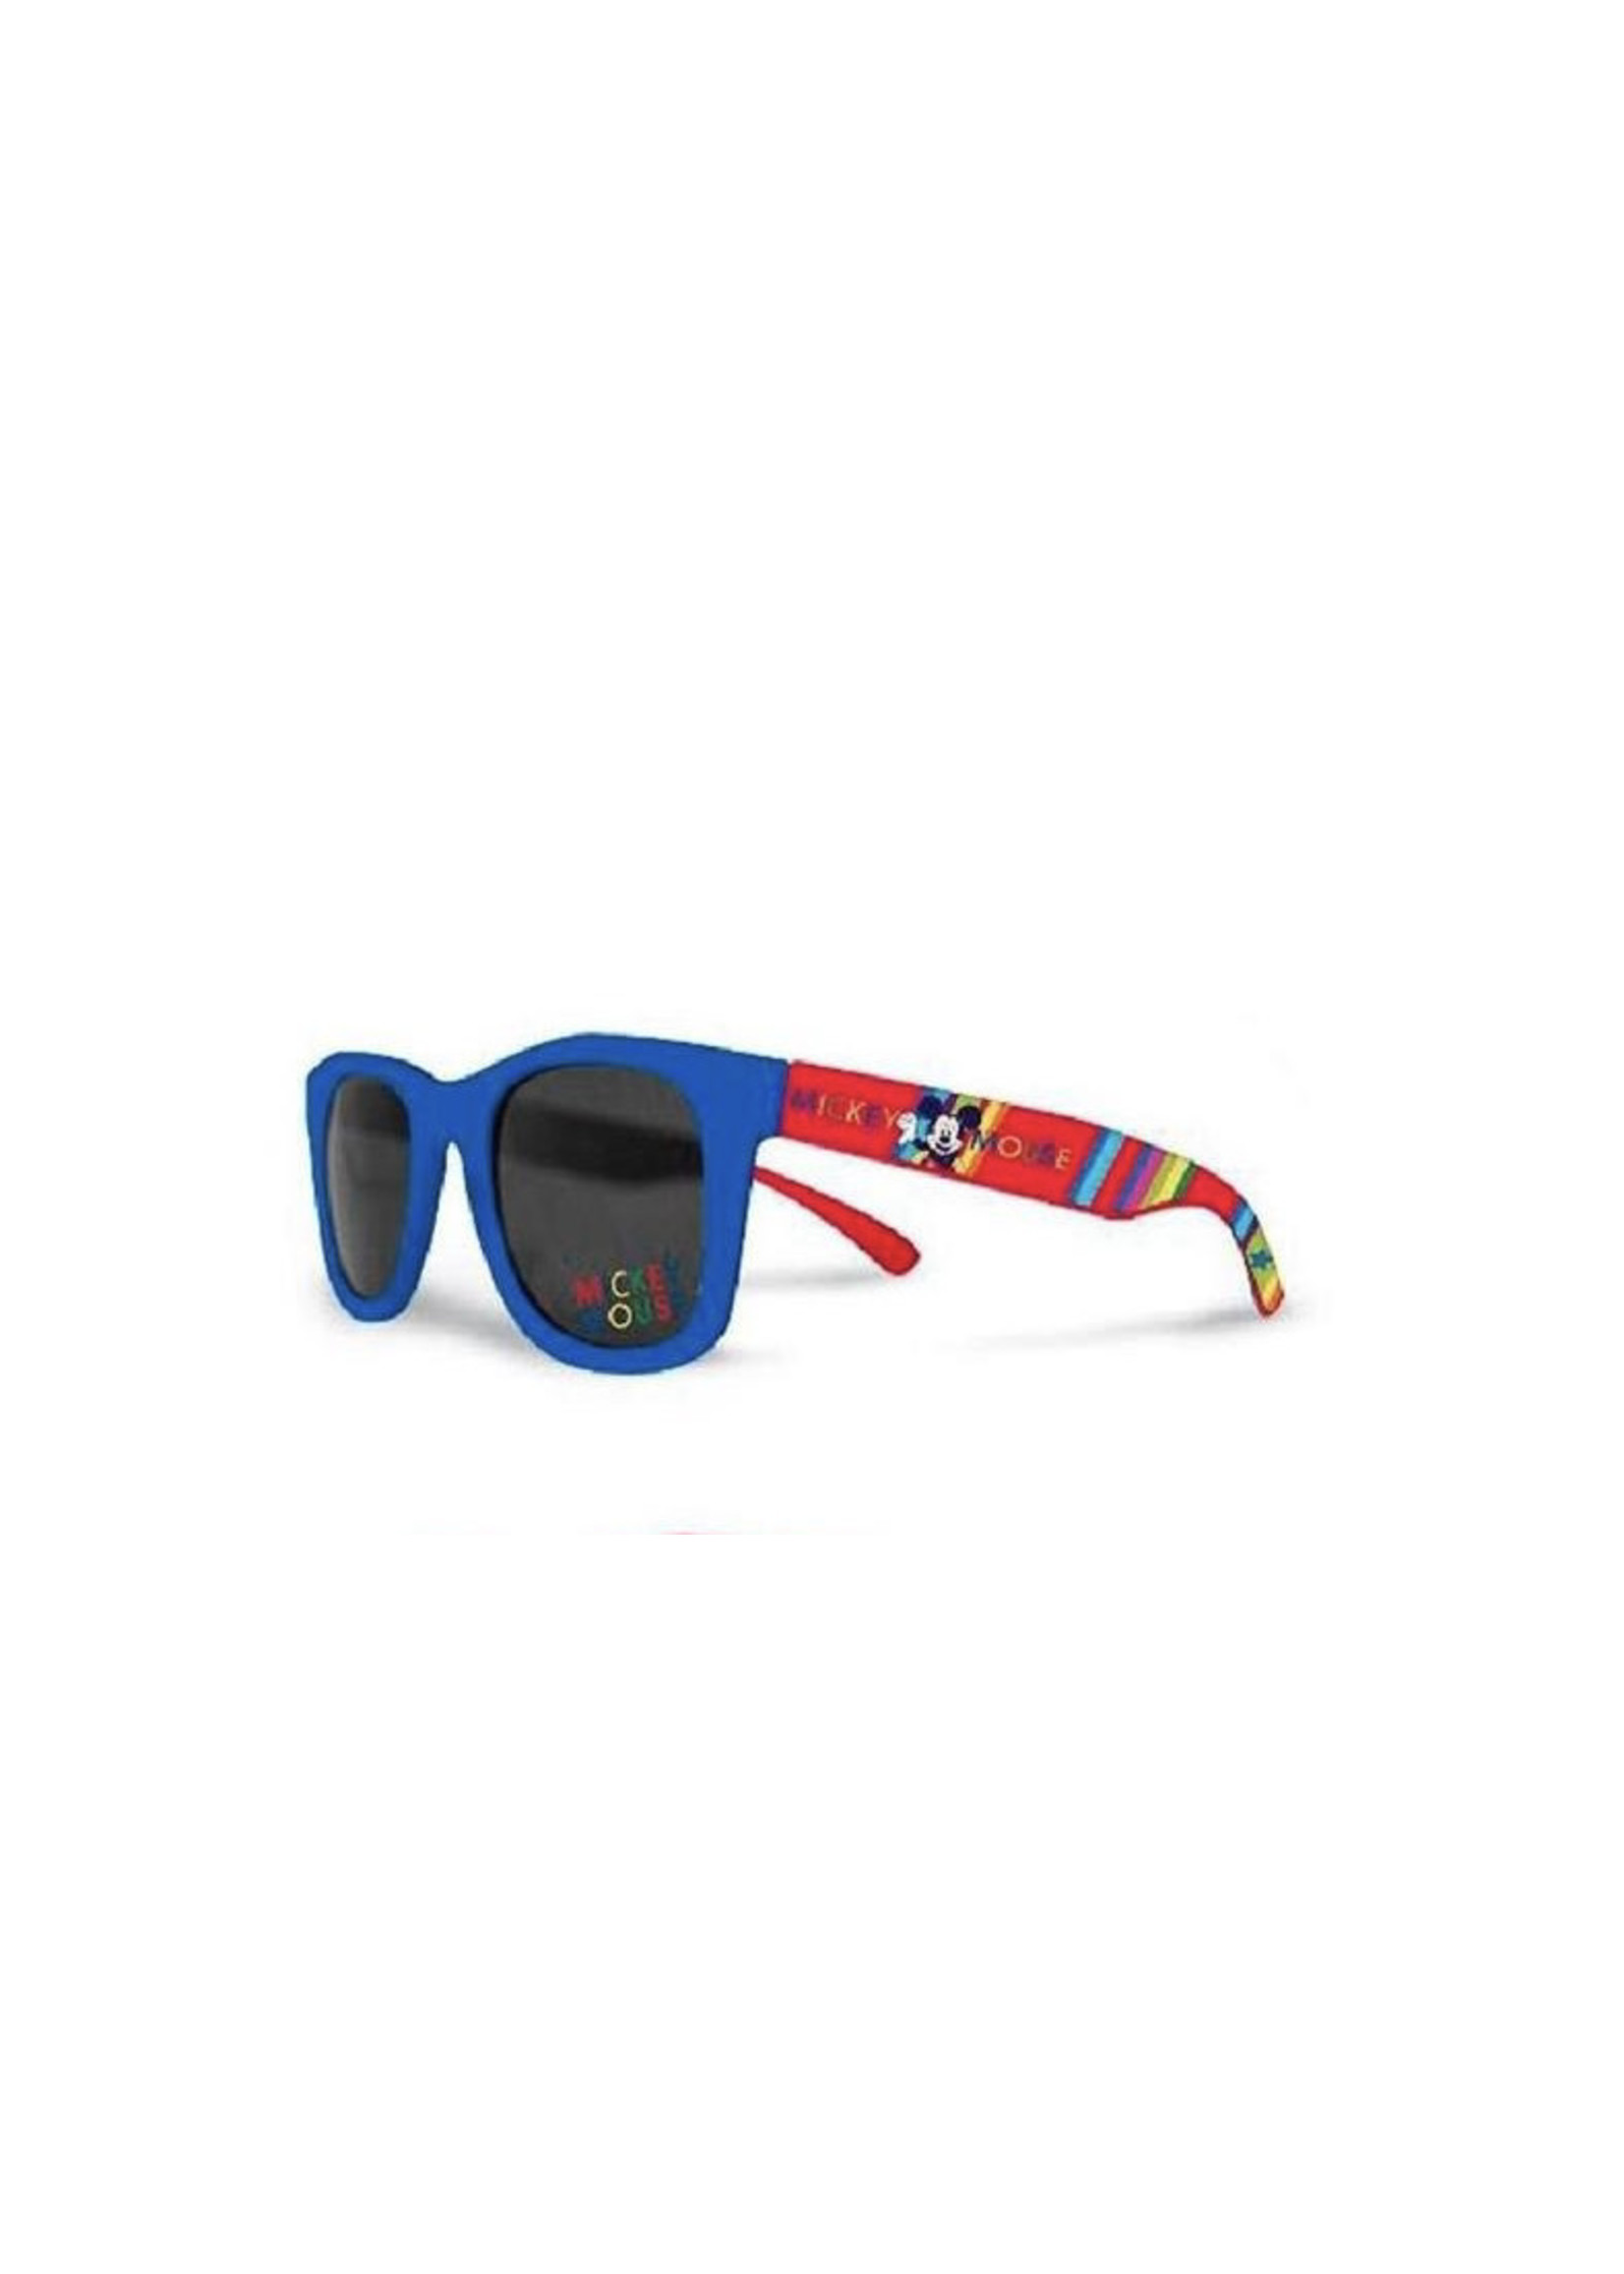 Disney Mickey Mouse sunglasses from Disney blue